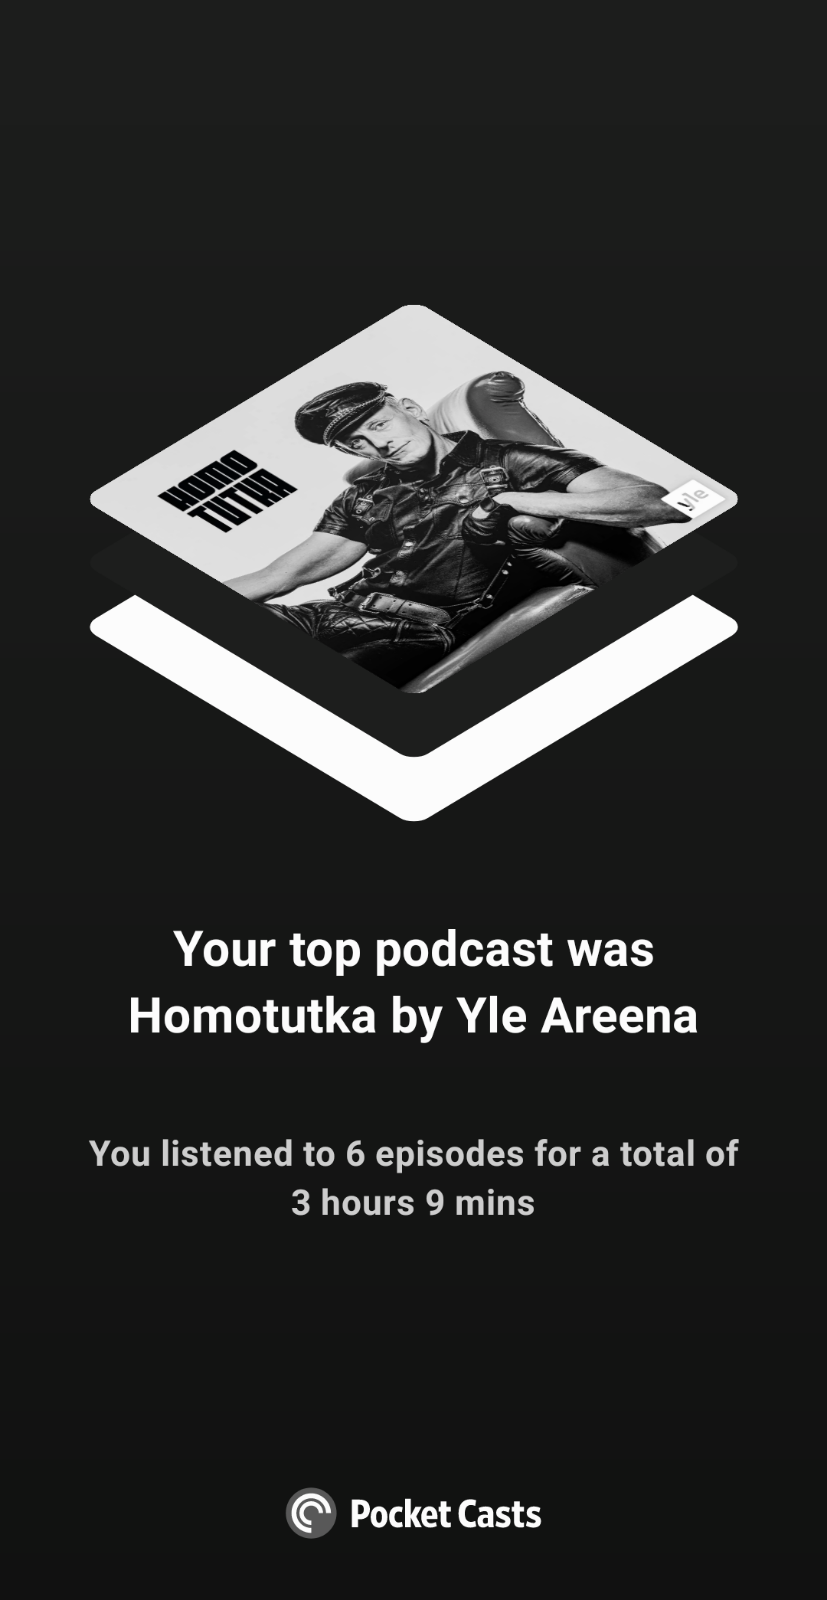 Your top podcast was Homotutka by Yle Areena. You listened to 6 episodes for a total of 3 hours 9 mins.